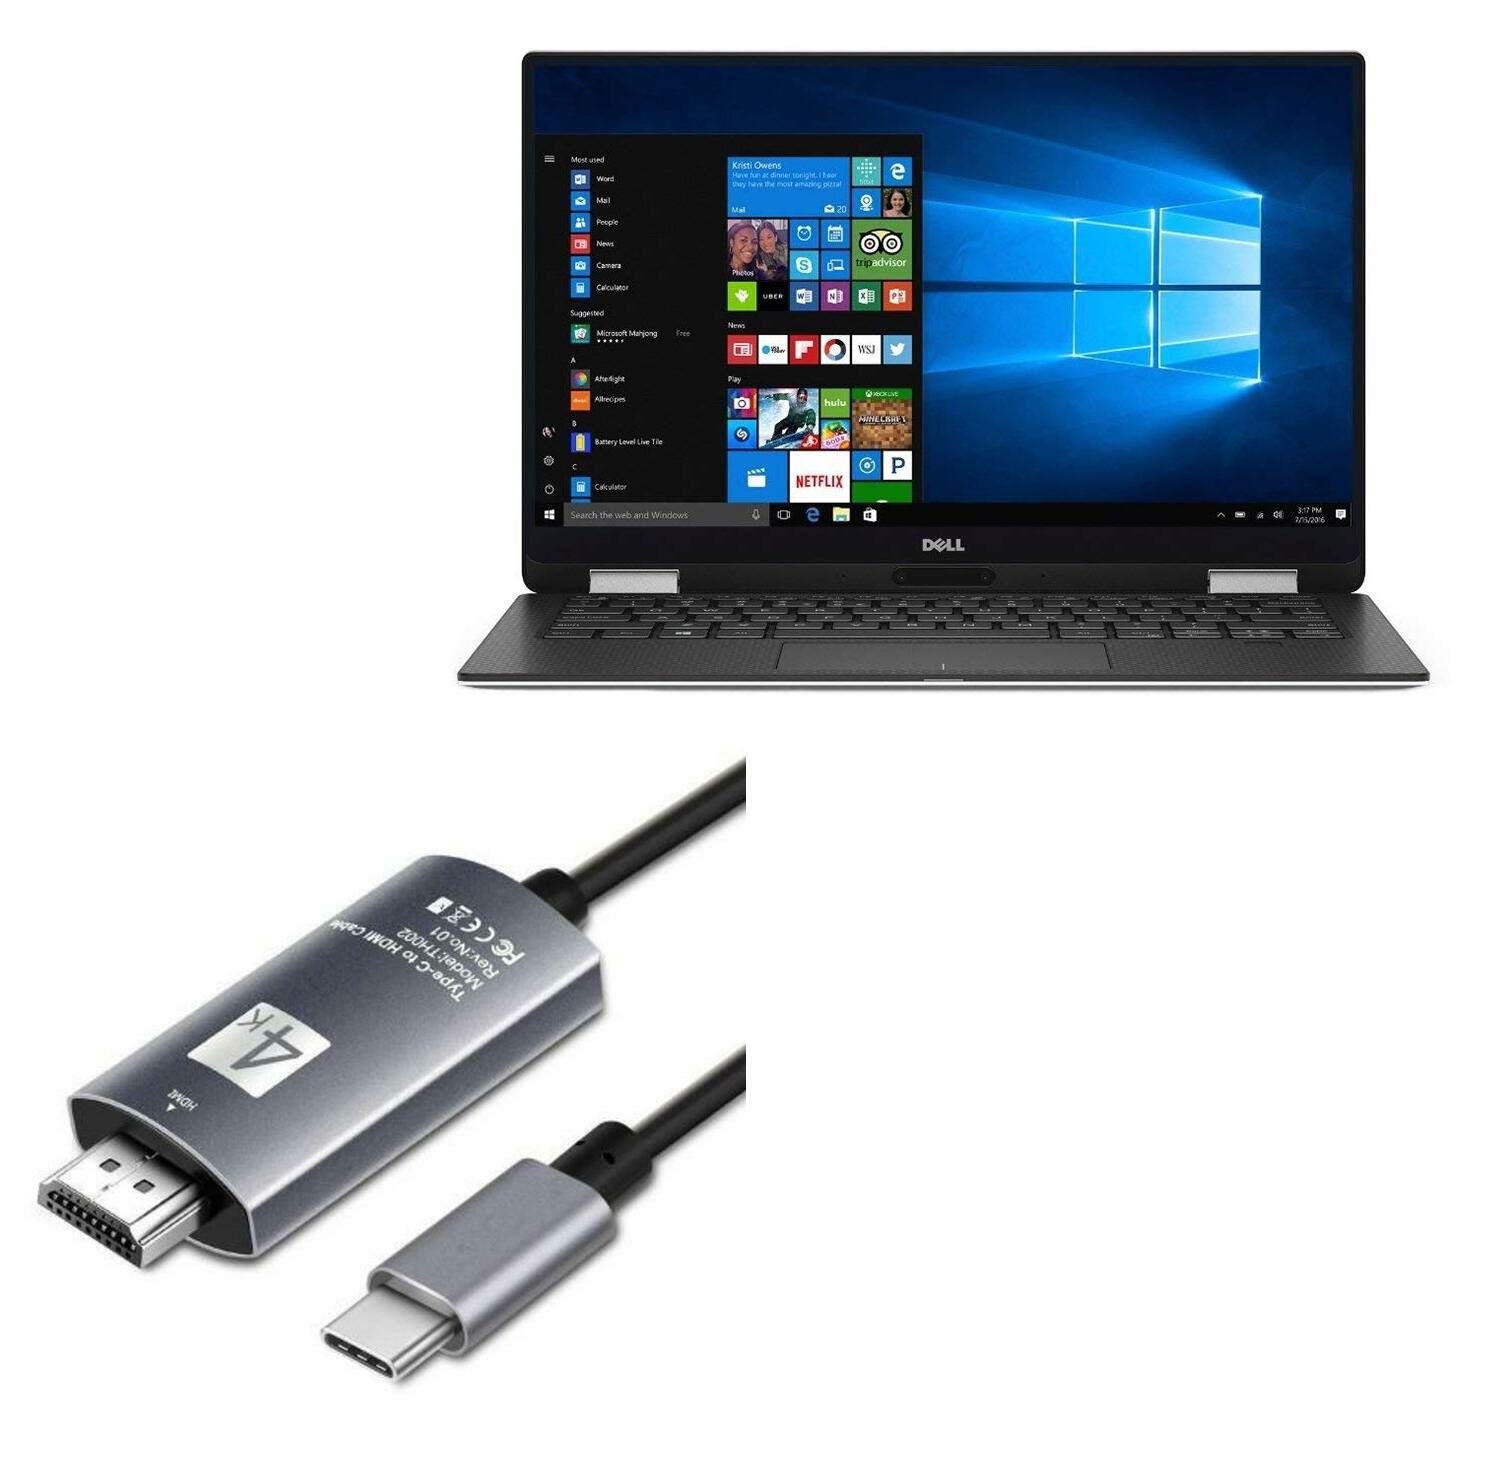 Ensure the cable connecting the Dell XPS 13 to an external monitor or TV is securely plugged in on both ends.
If using an adapter, make sure it is properly connected.